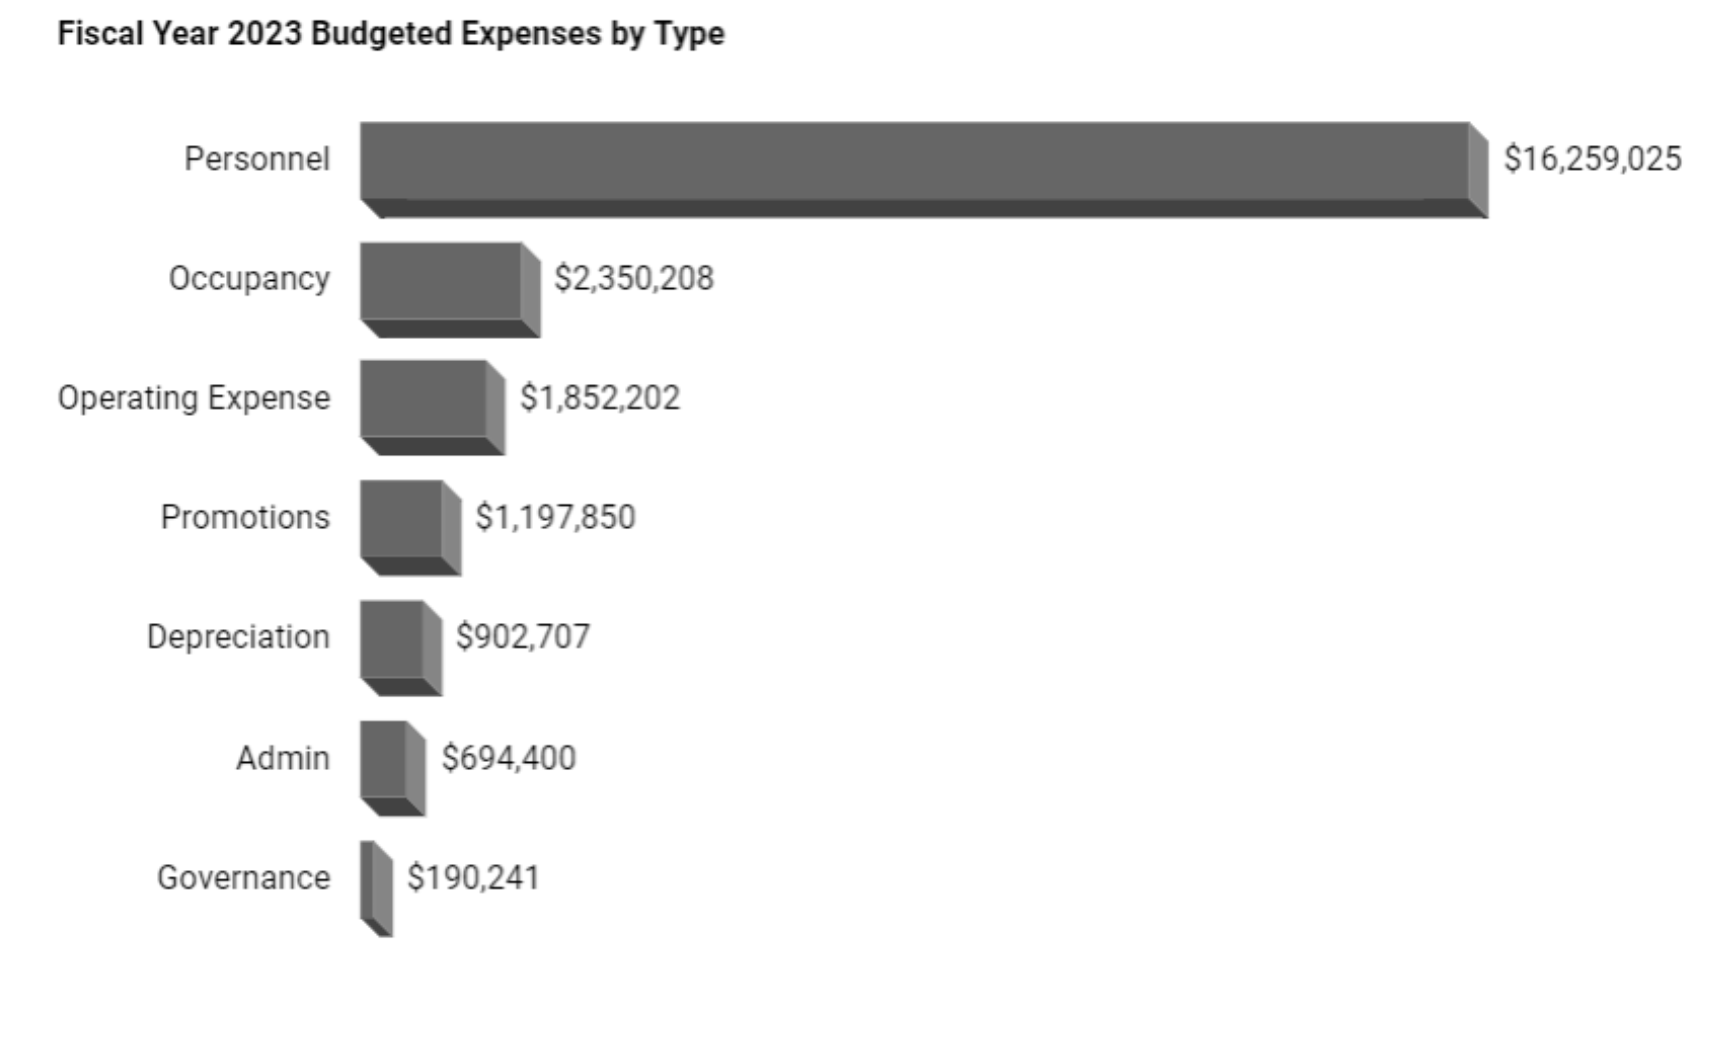 Fiscal Year 2023 Expenses